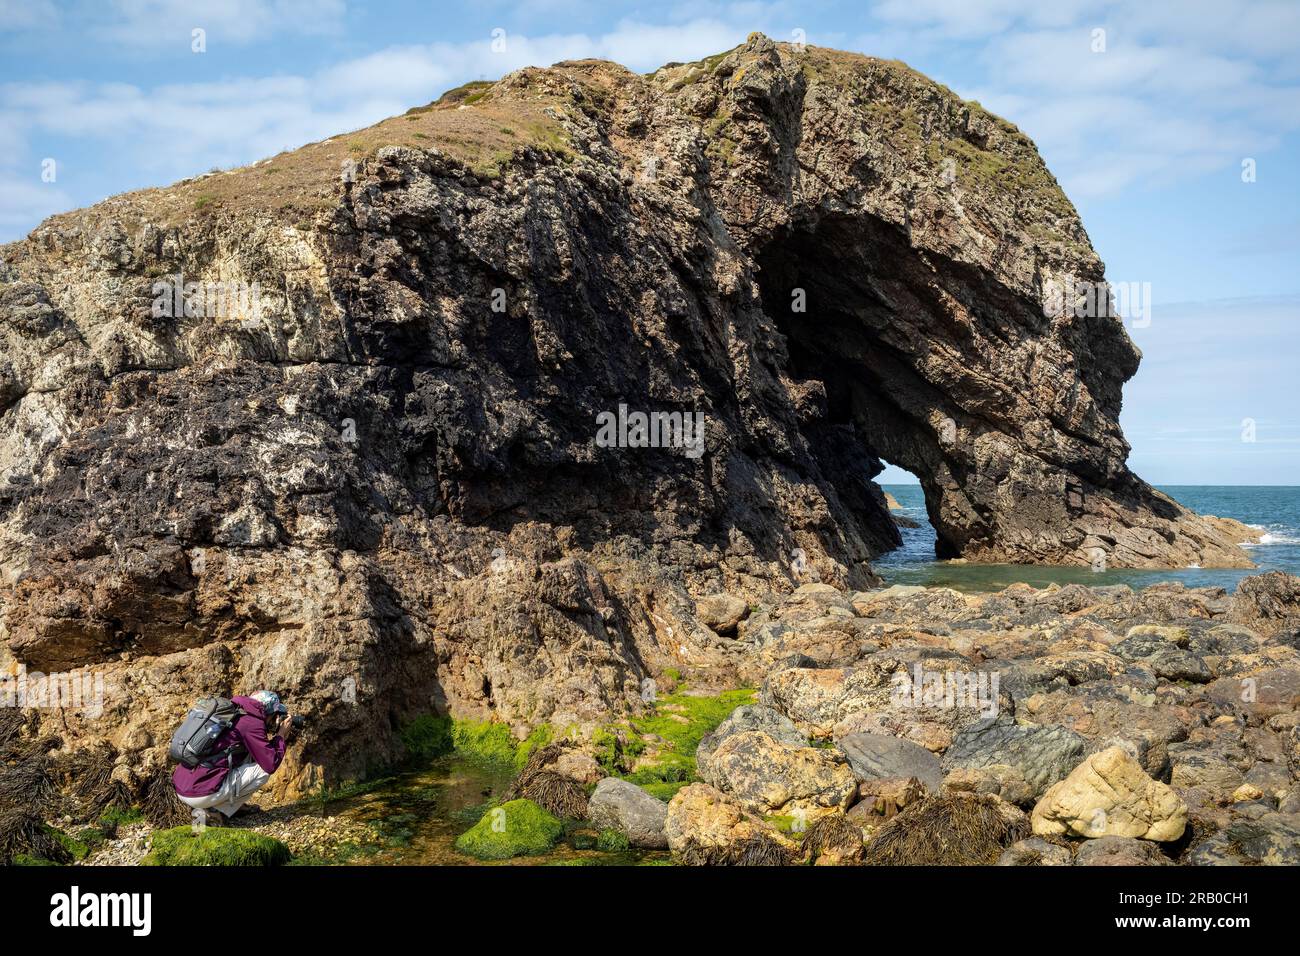 A hiker photographing a rock pool below the tidal island of of Ynys y Fydlyn, NW Anglesey, Wales, UK Stock Photo